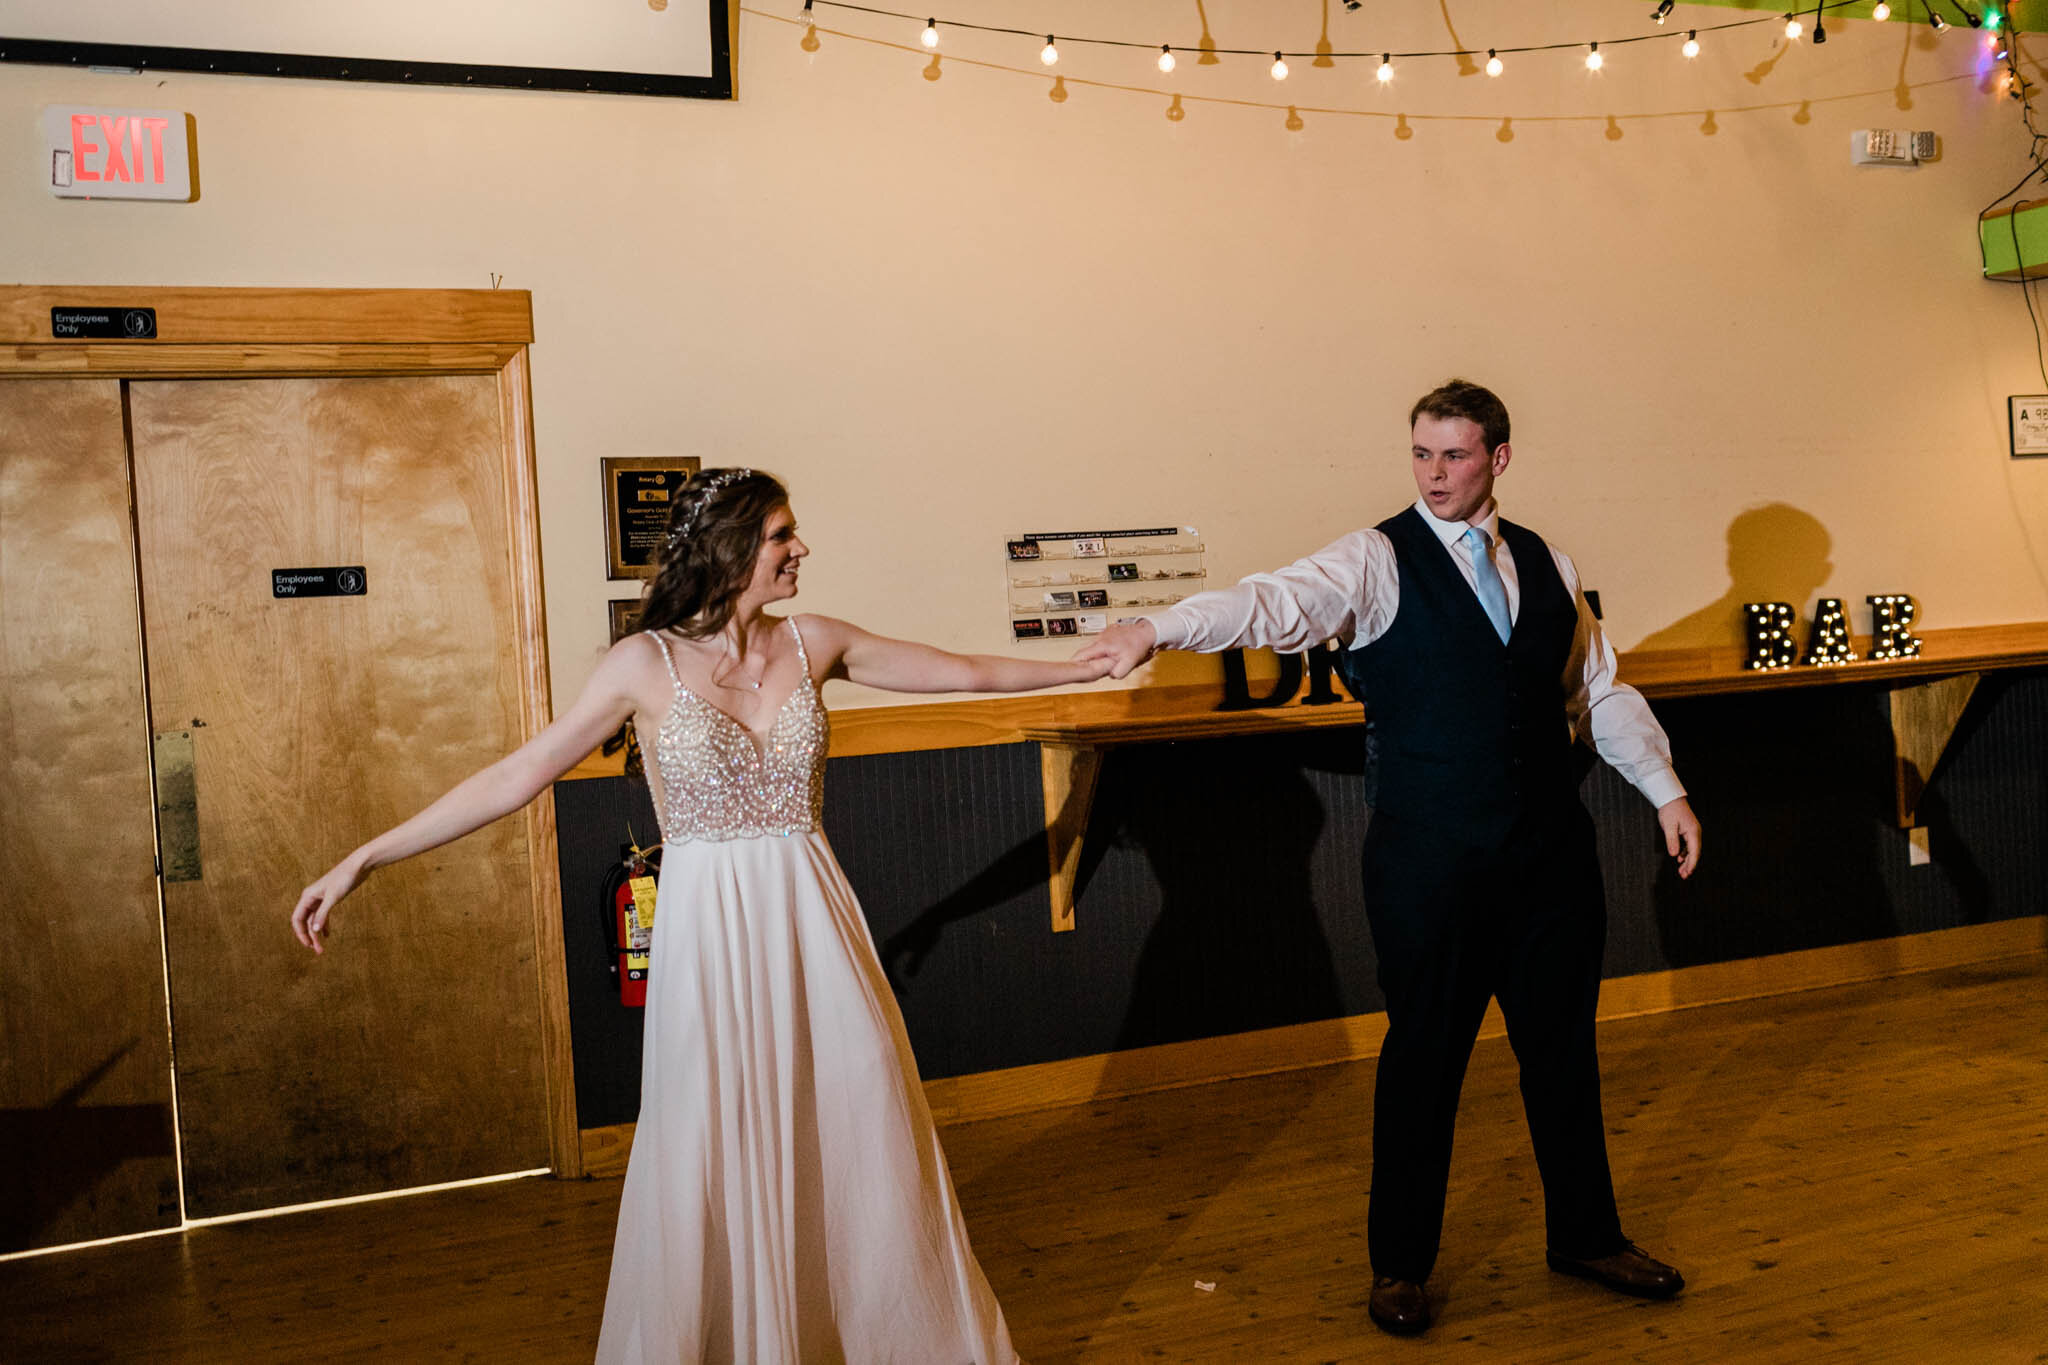 Durham Wedding Photographer | By G. Lin Photography | Bride and groom dancing